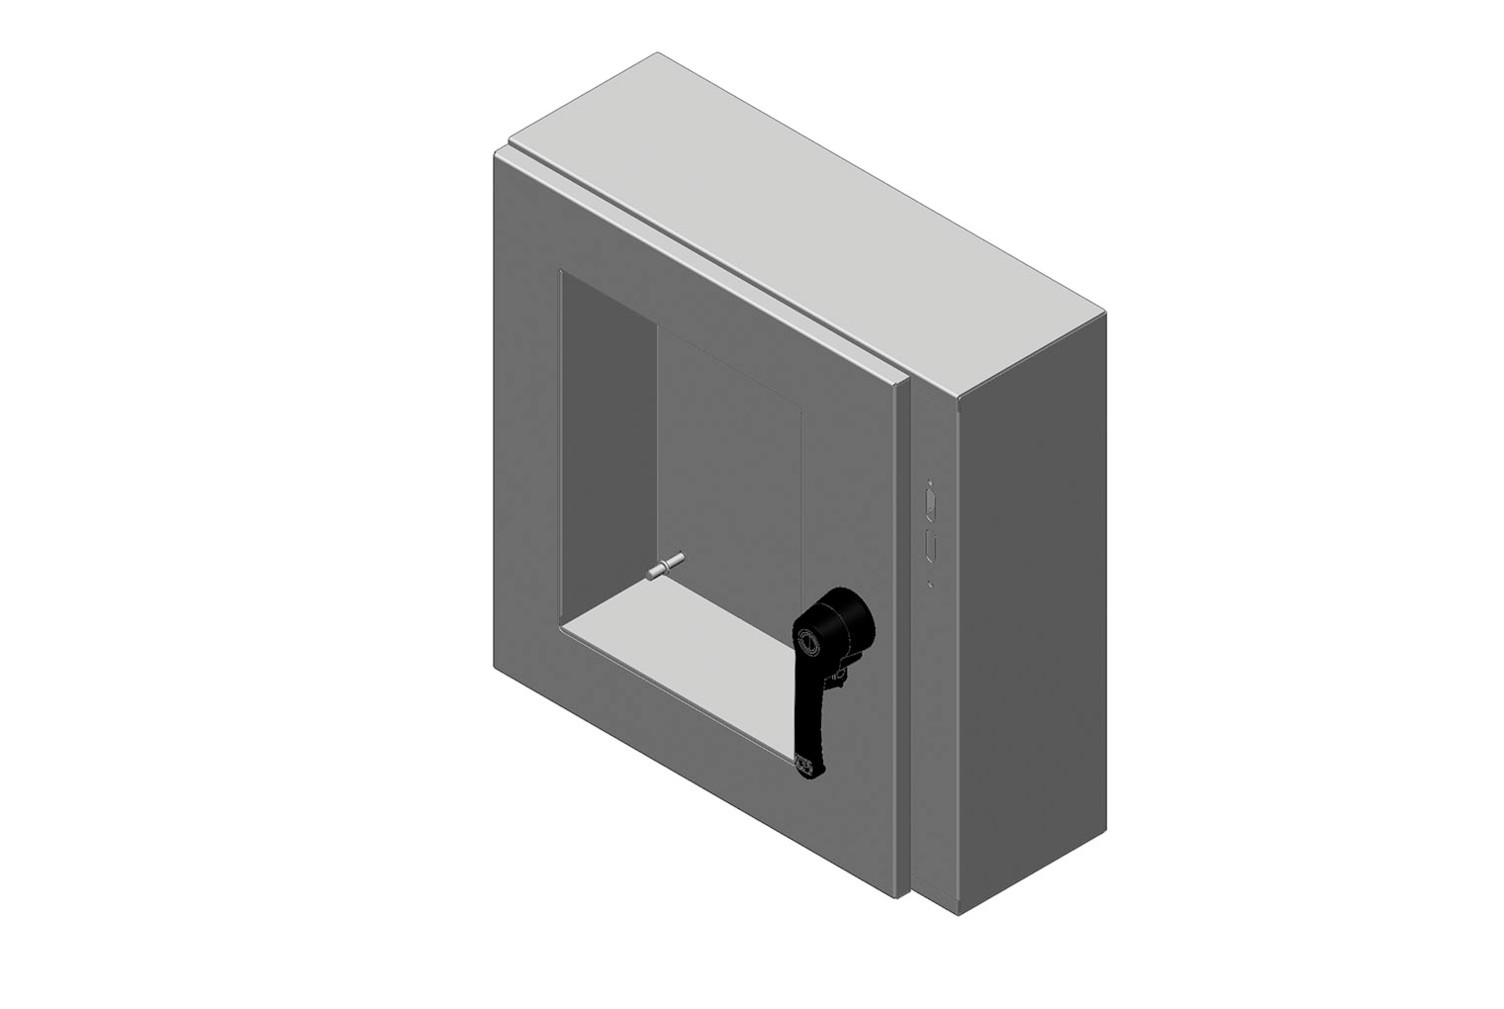 RMR Standard Wall-Mount Disconnect Enclosure, Type 4, with Solid Single Door - Image 17